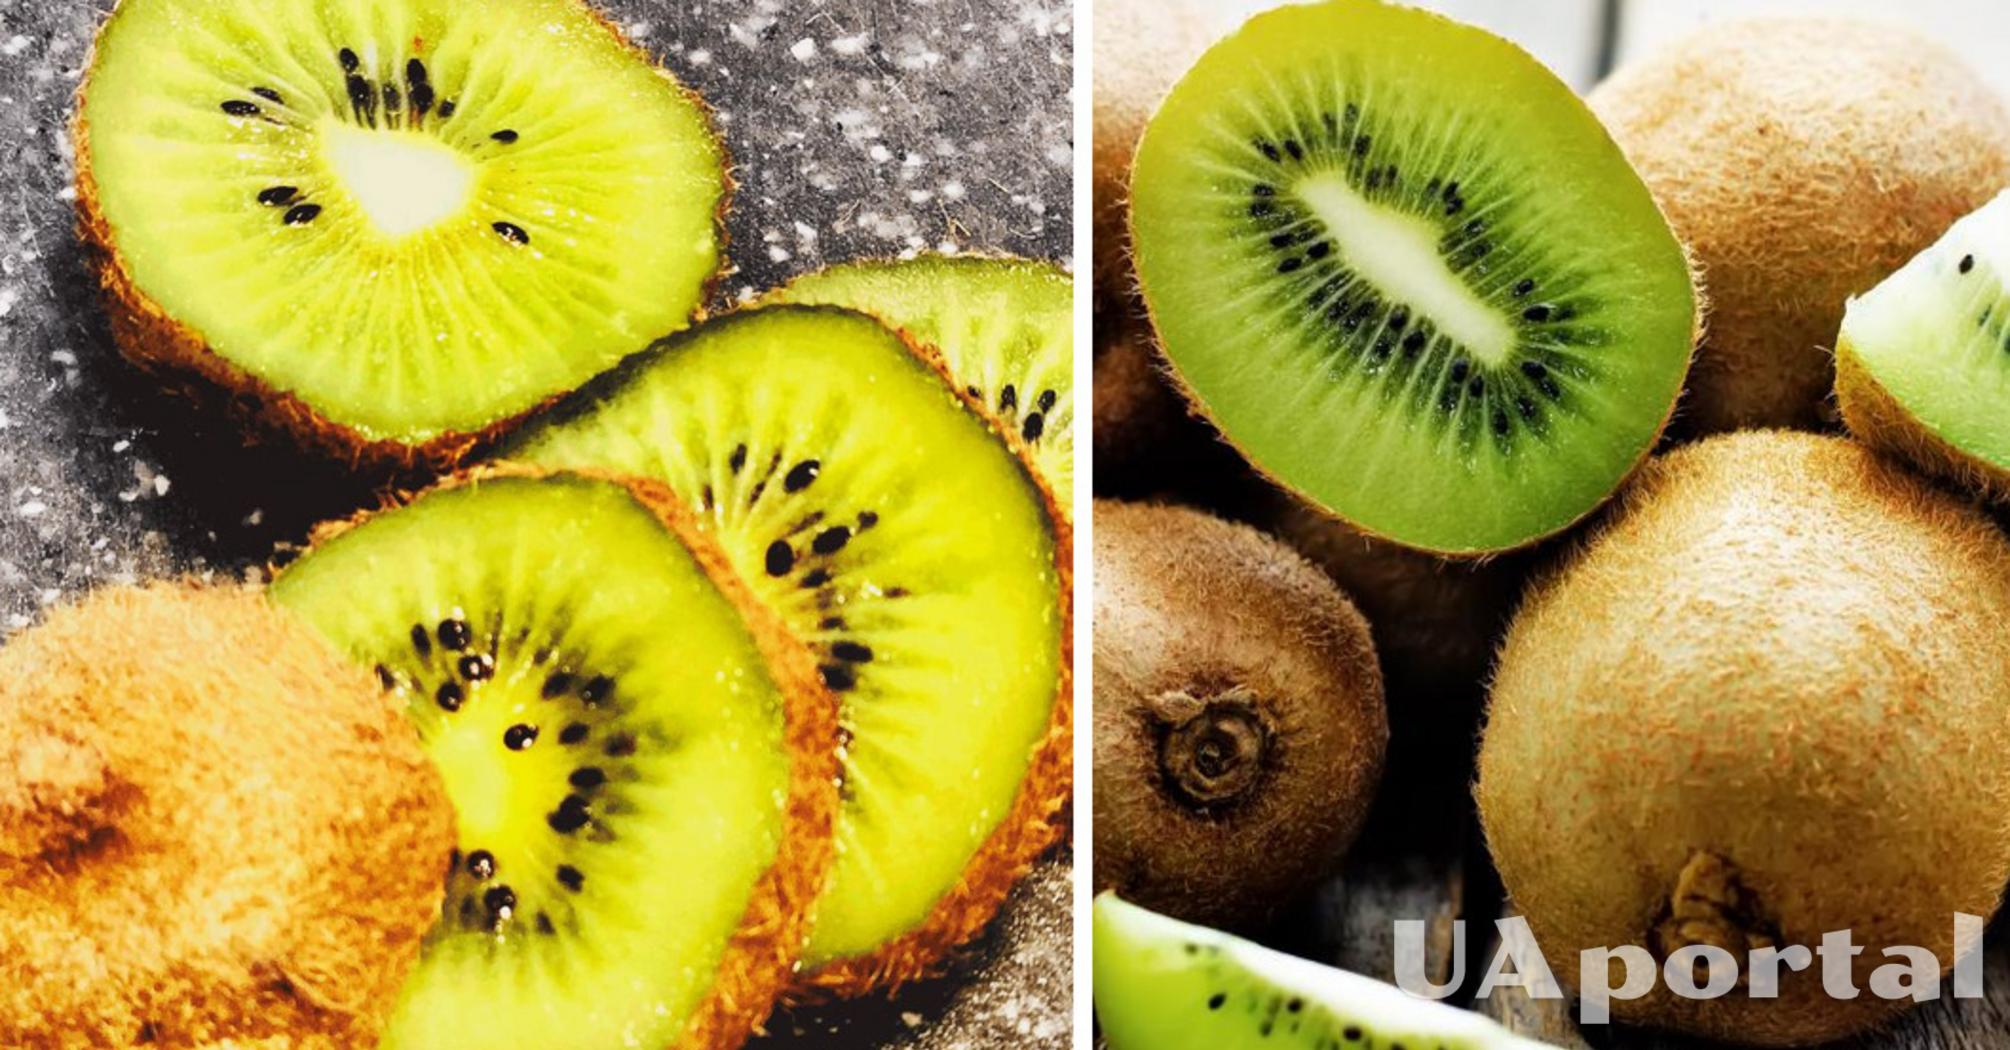 Effectively fights stress and insomnia: fruit that should be consumed daily is named